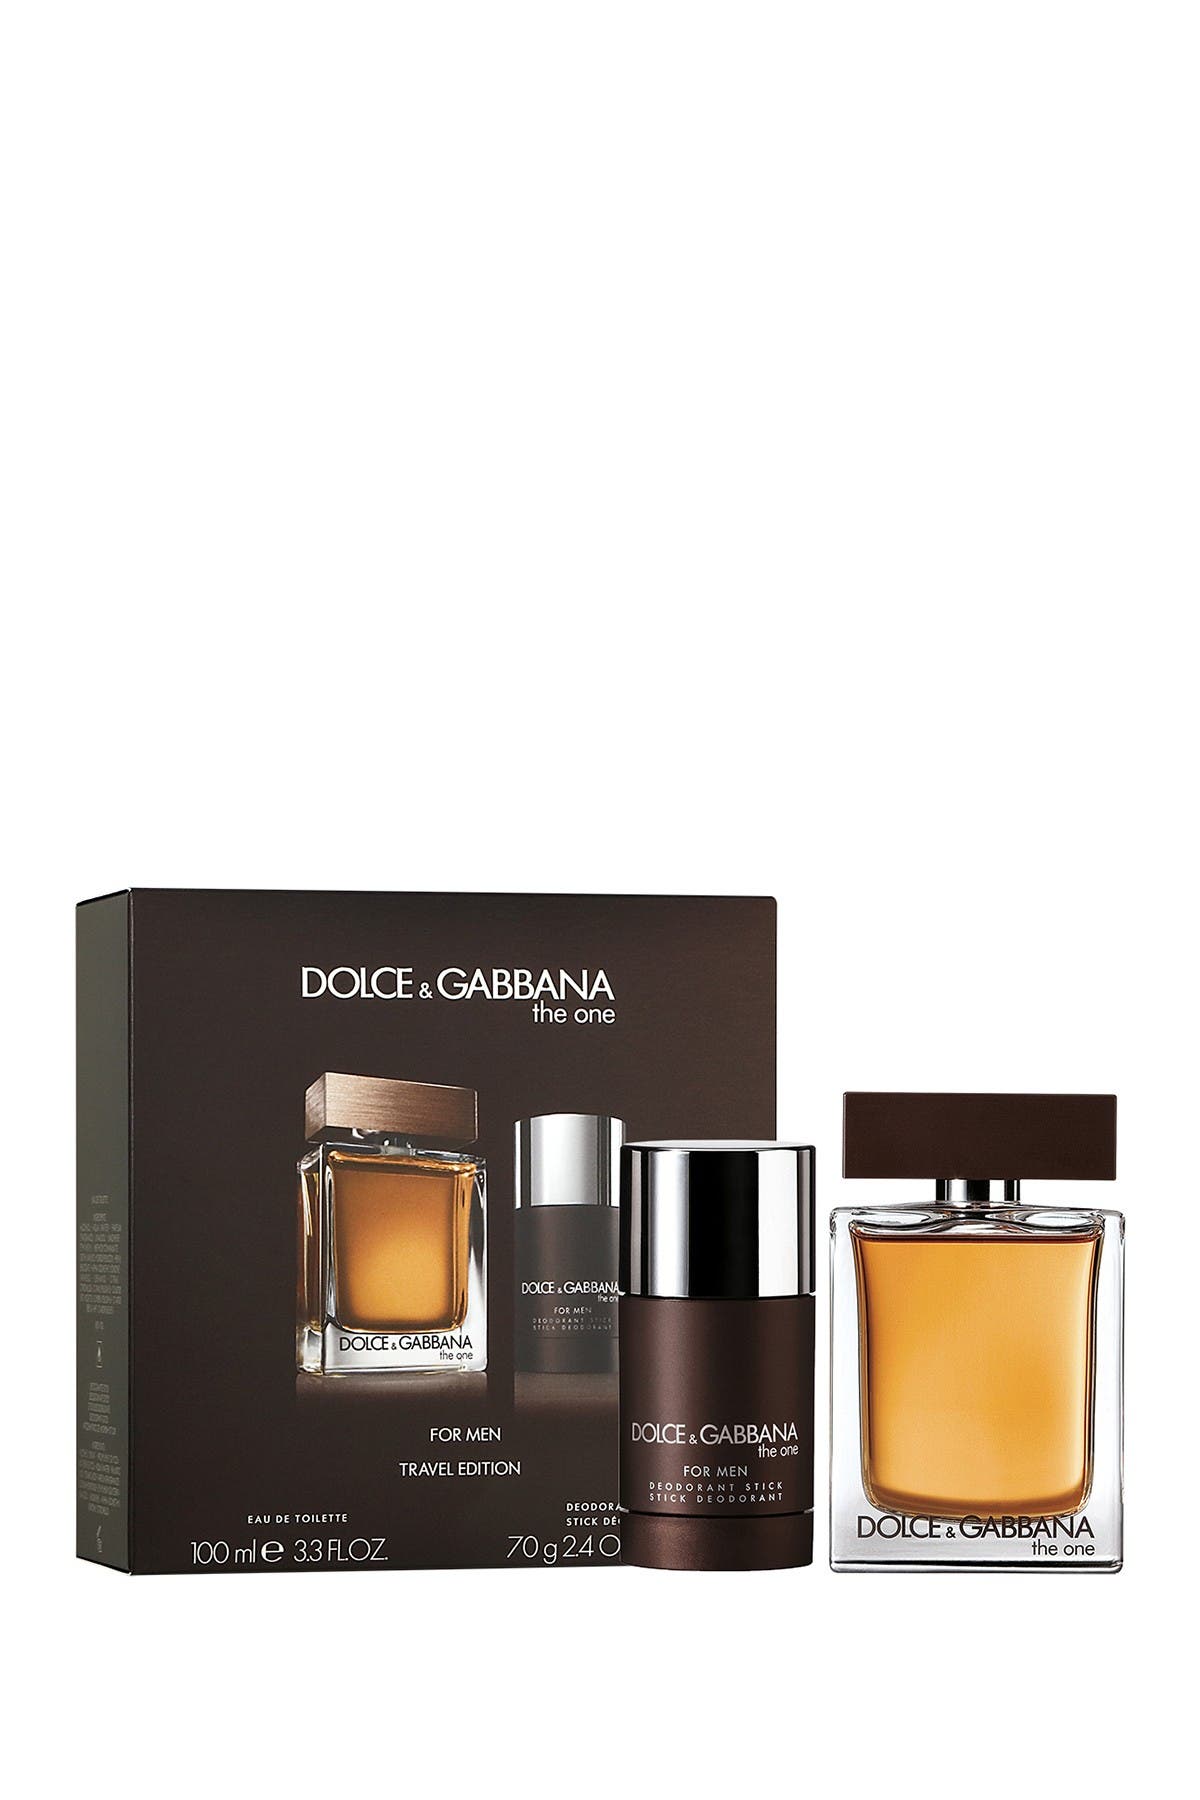 dolce gabbana the one travel edition